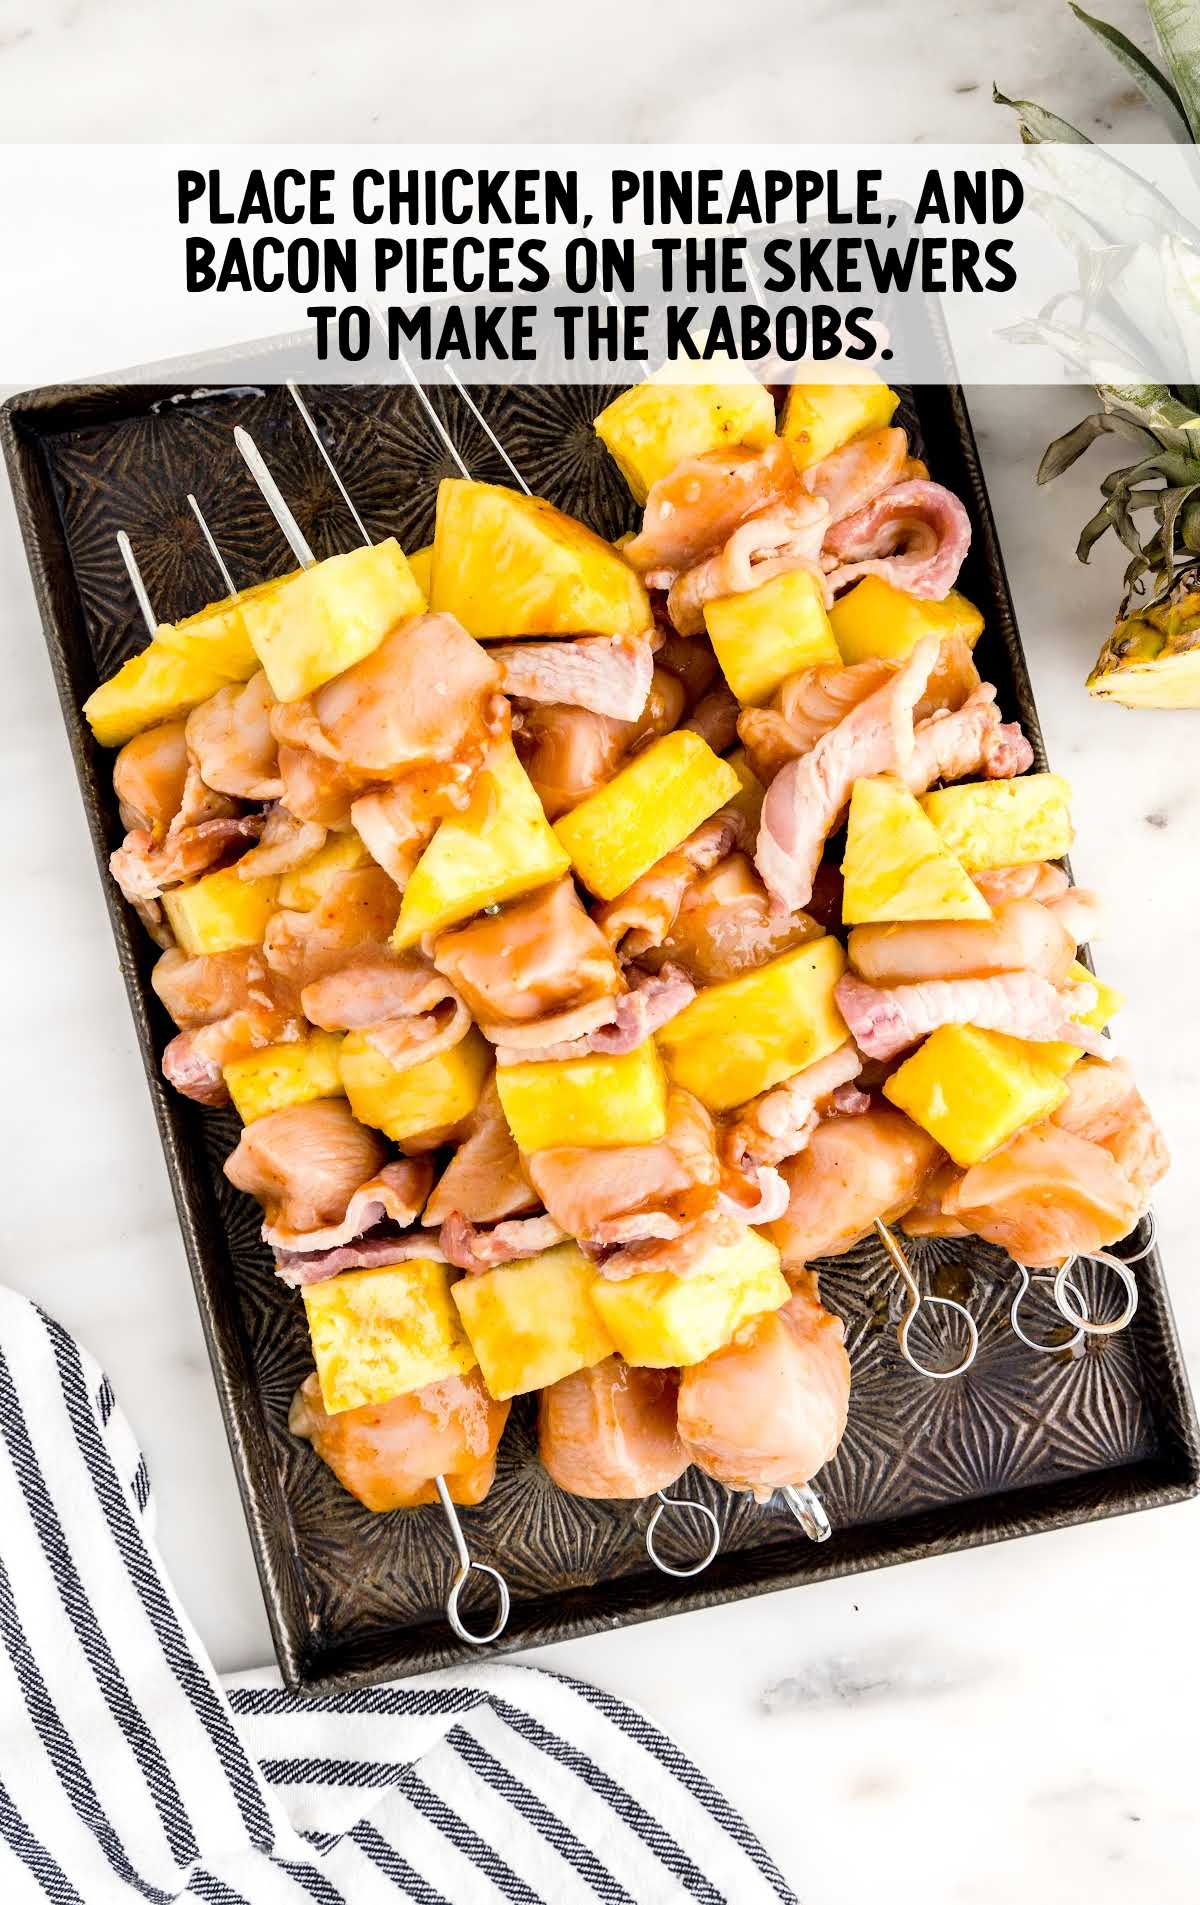 Chicken, pineapple and bacon pieces placed on the skewers